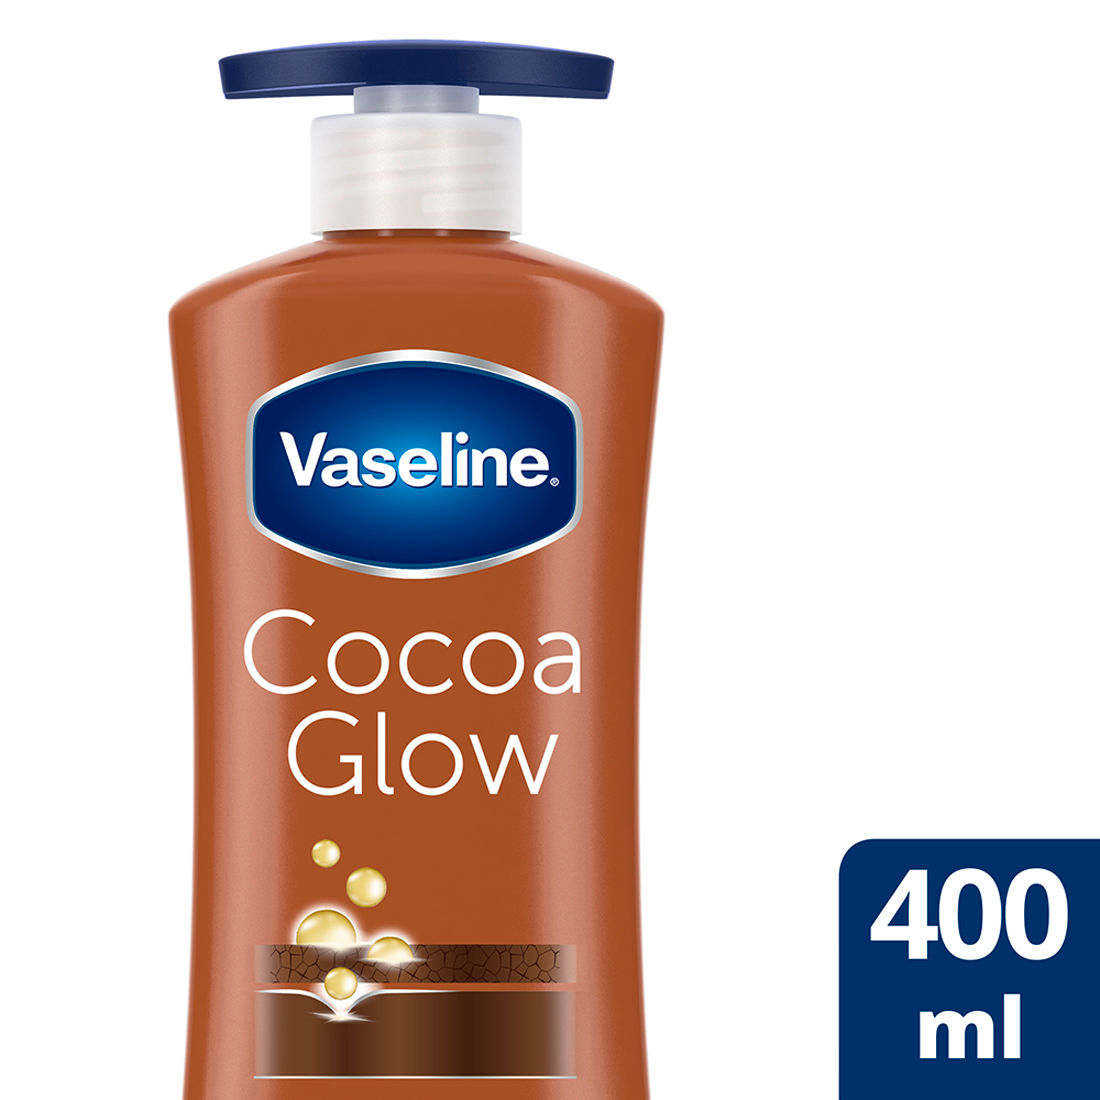 Vaseline Intensive Care Cocoa Glow Body Lotion, 400 ml, Pack of 1 